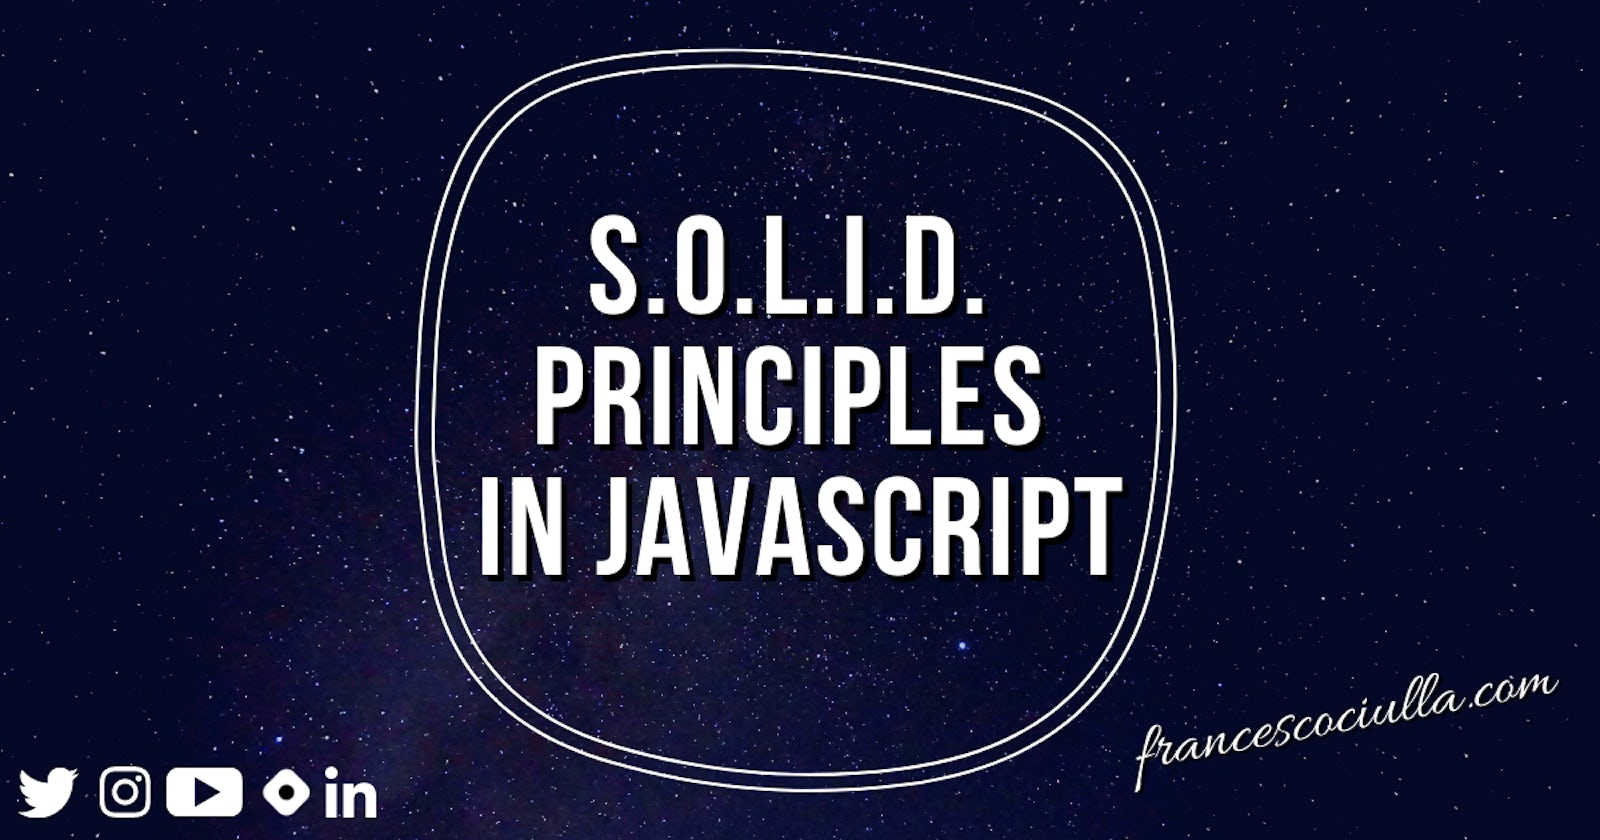 S.O.L.I.D. Principles around You, in JavaScript